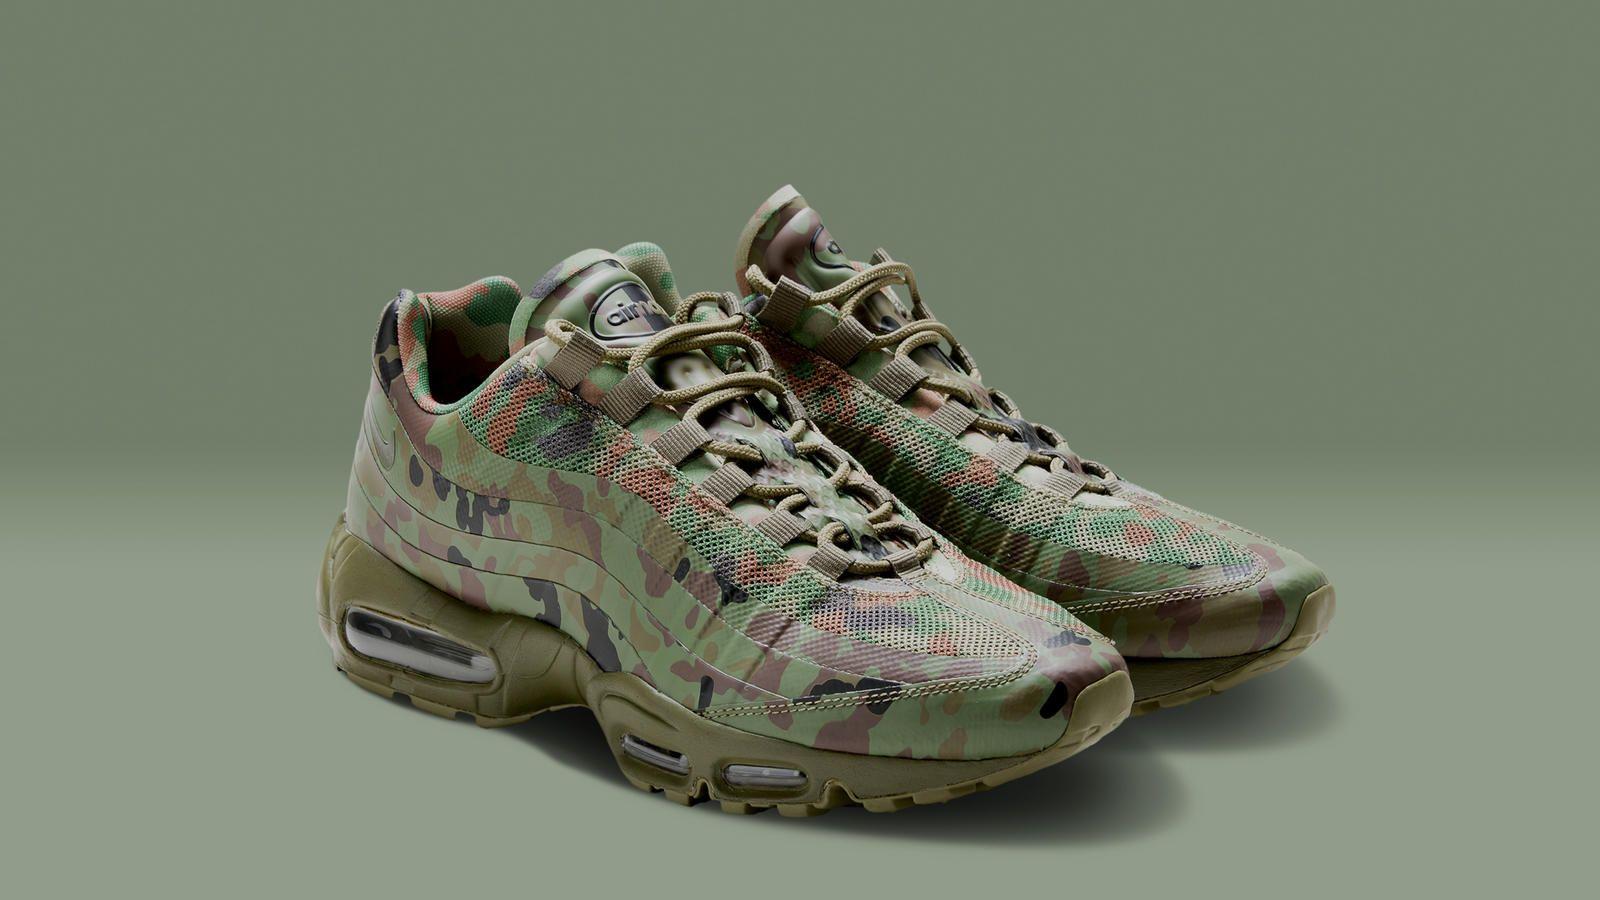 Camouflage Nike Logo - Revealed: the Nike Air Max Camo Collection